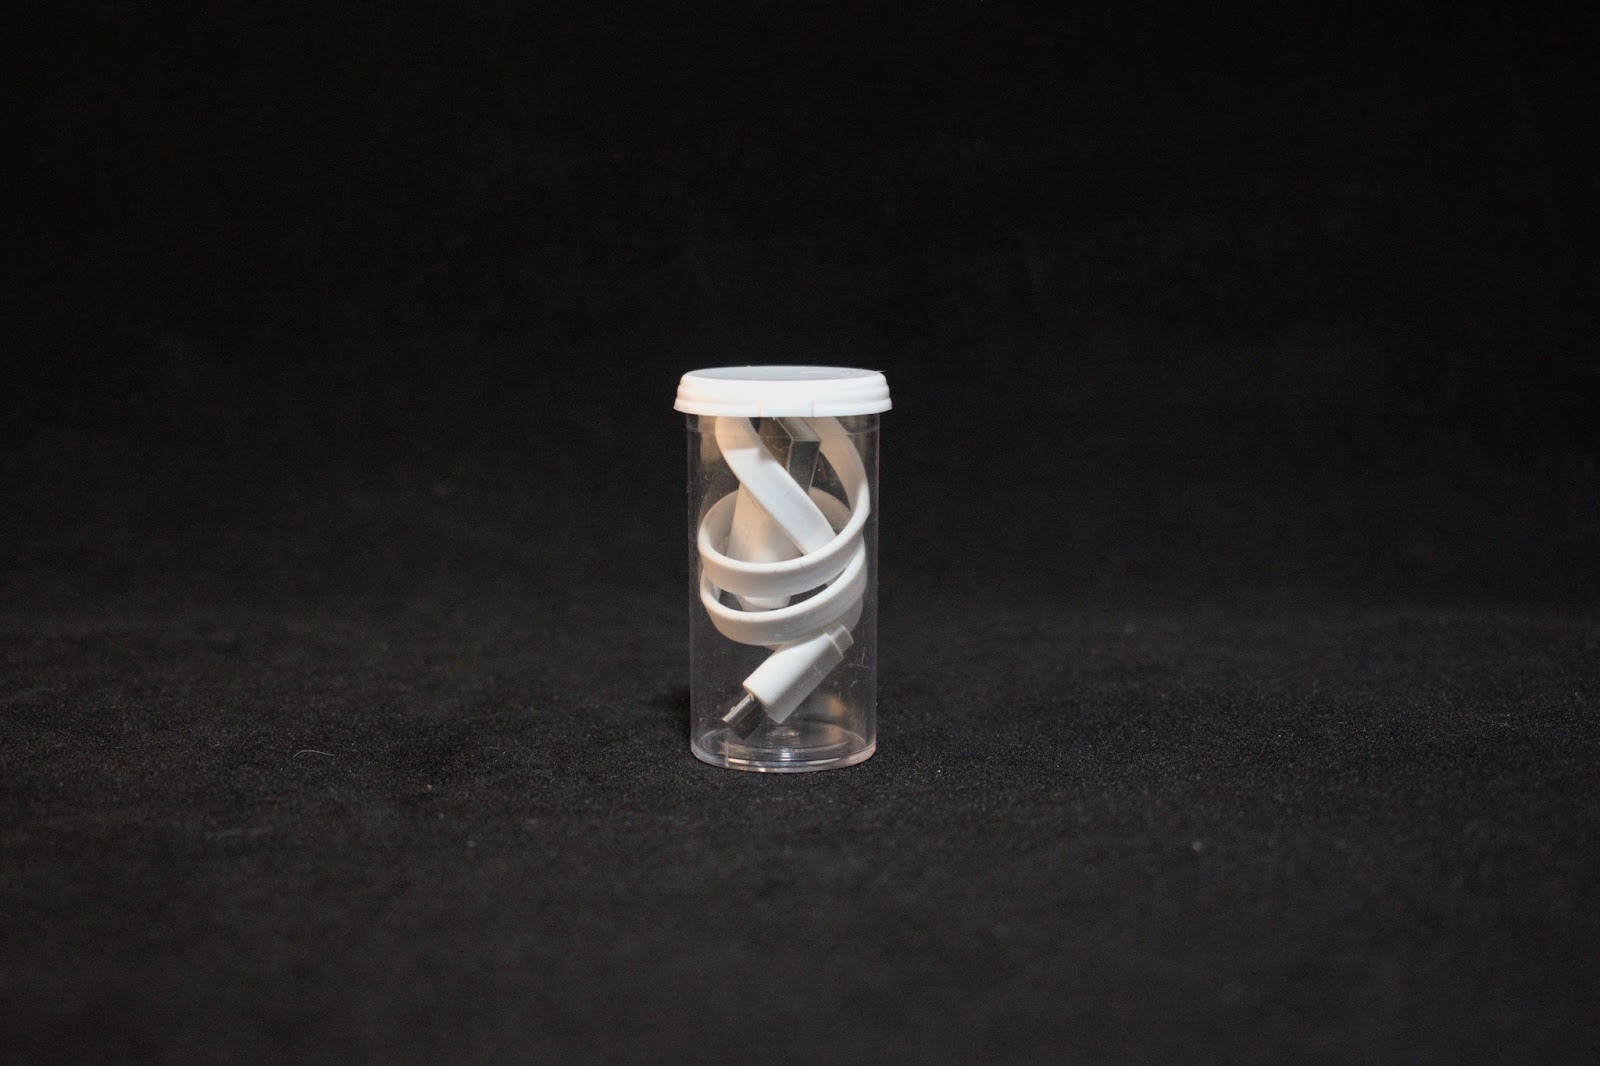 Coiled Charging Cord in a 5 Dram Vial